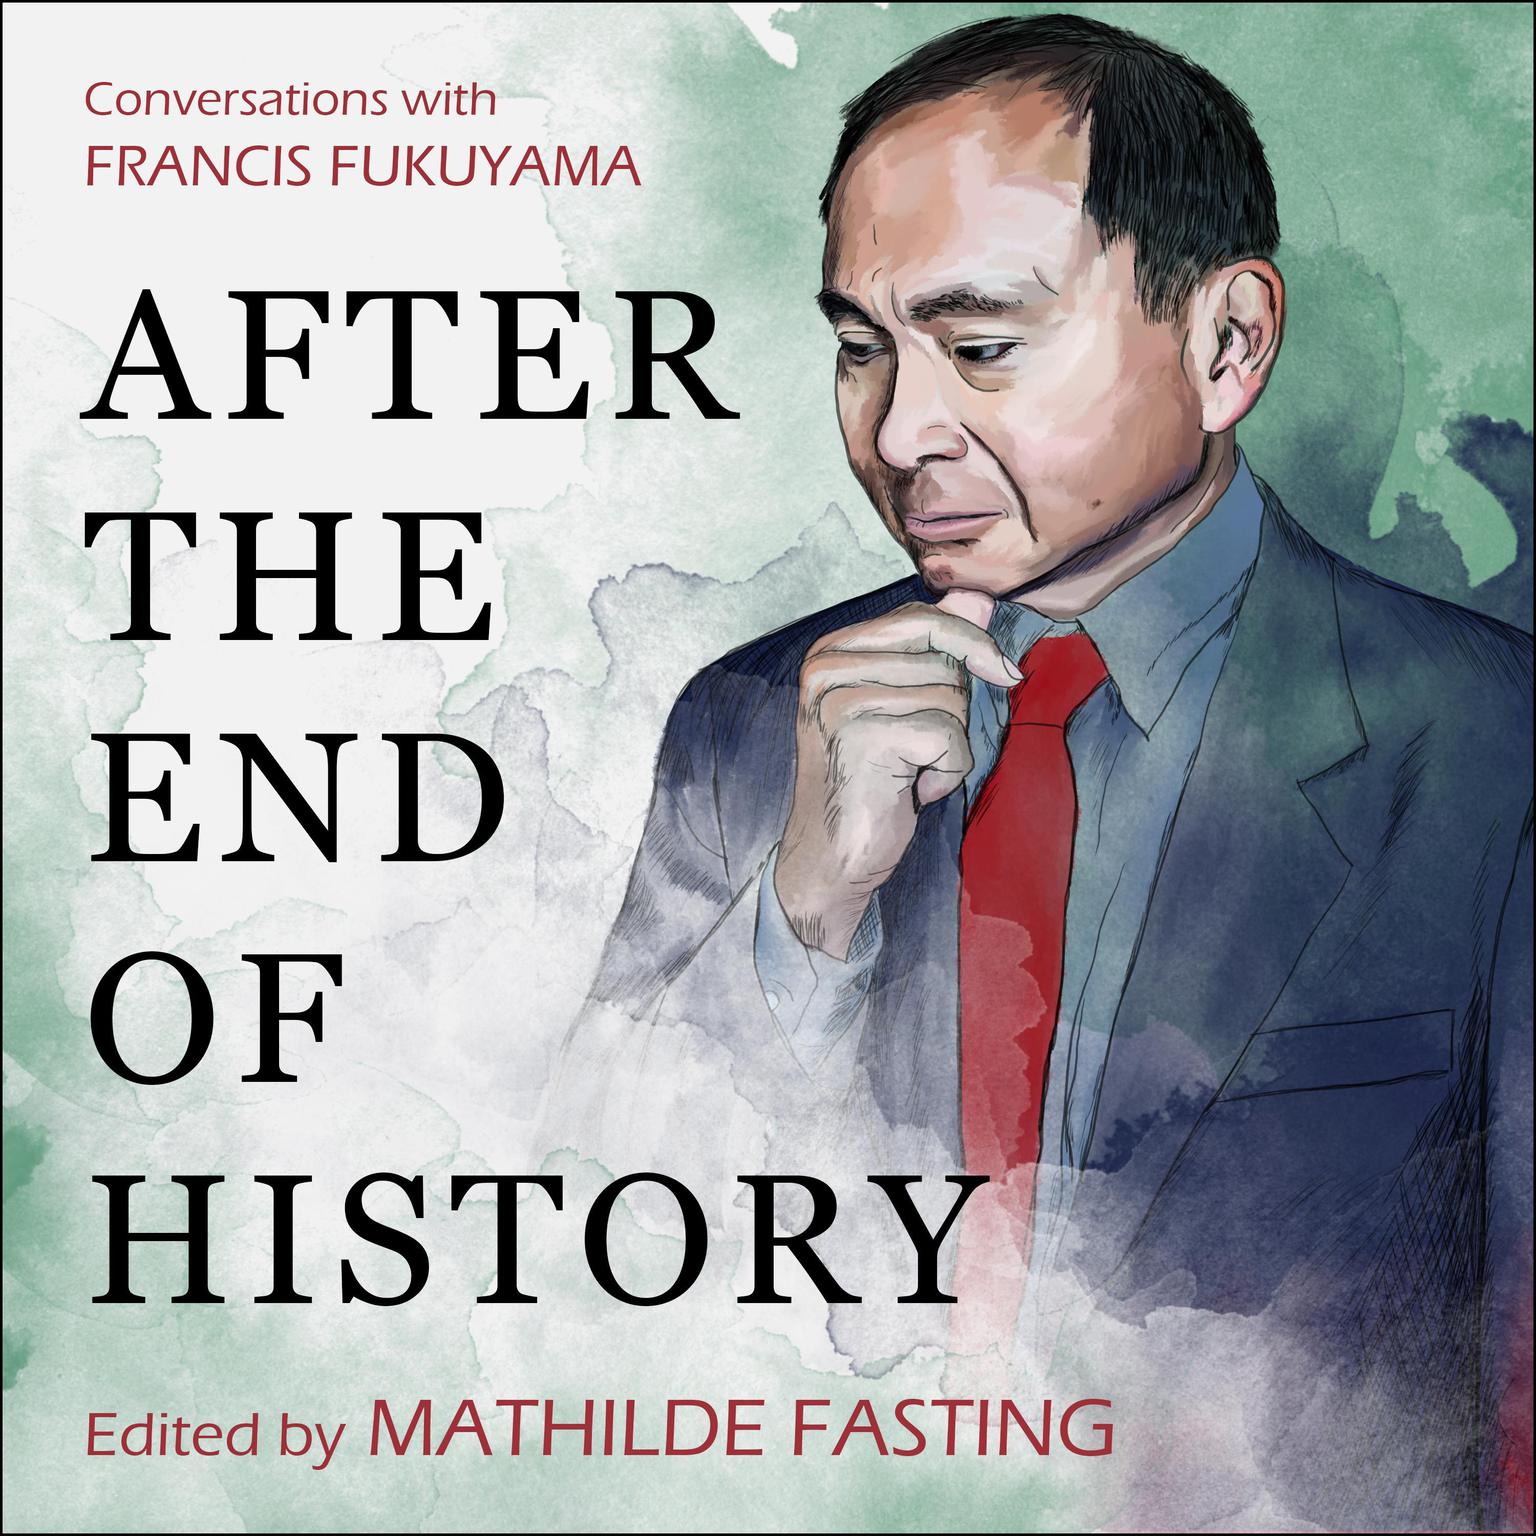 After the End of History: Conversations with Francis Fukuyama Audiobook, by Mathilde Fasting